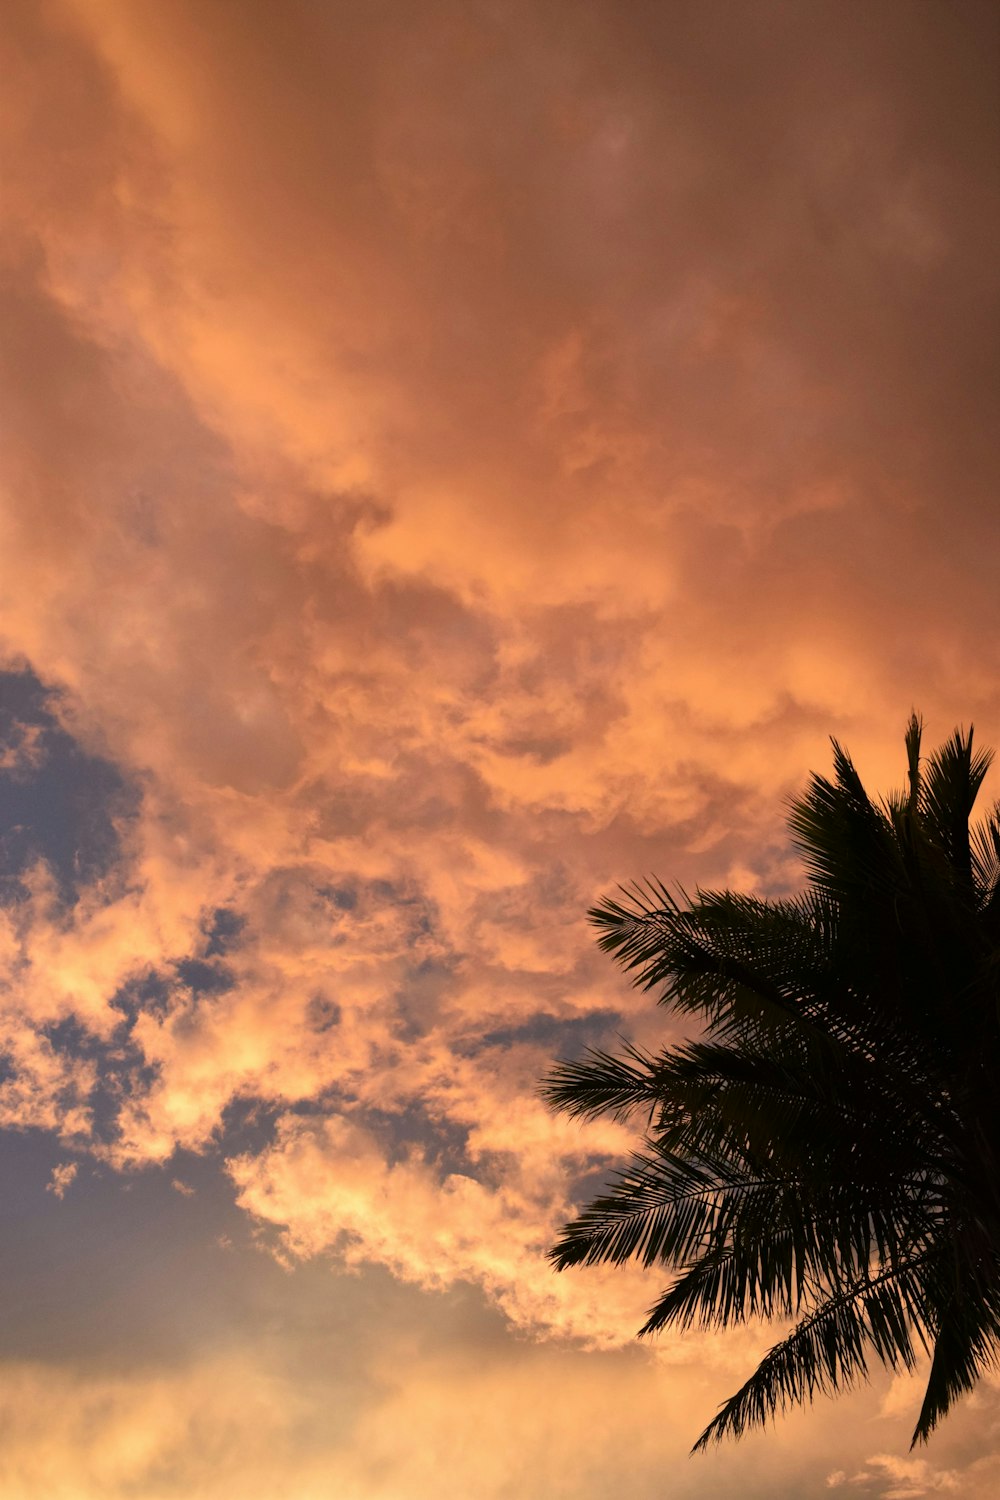 a palm tree is silhouetted against a sunset sky